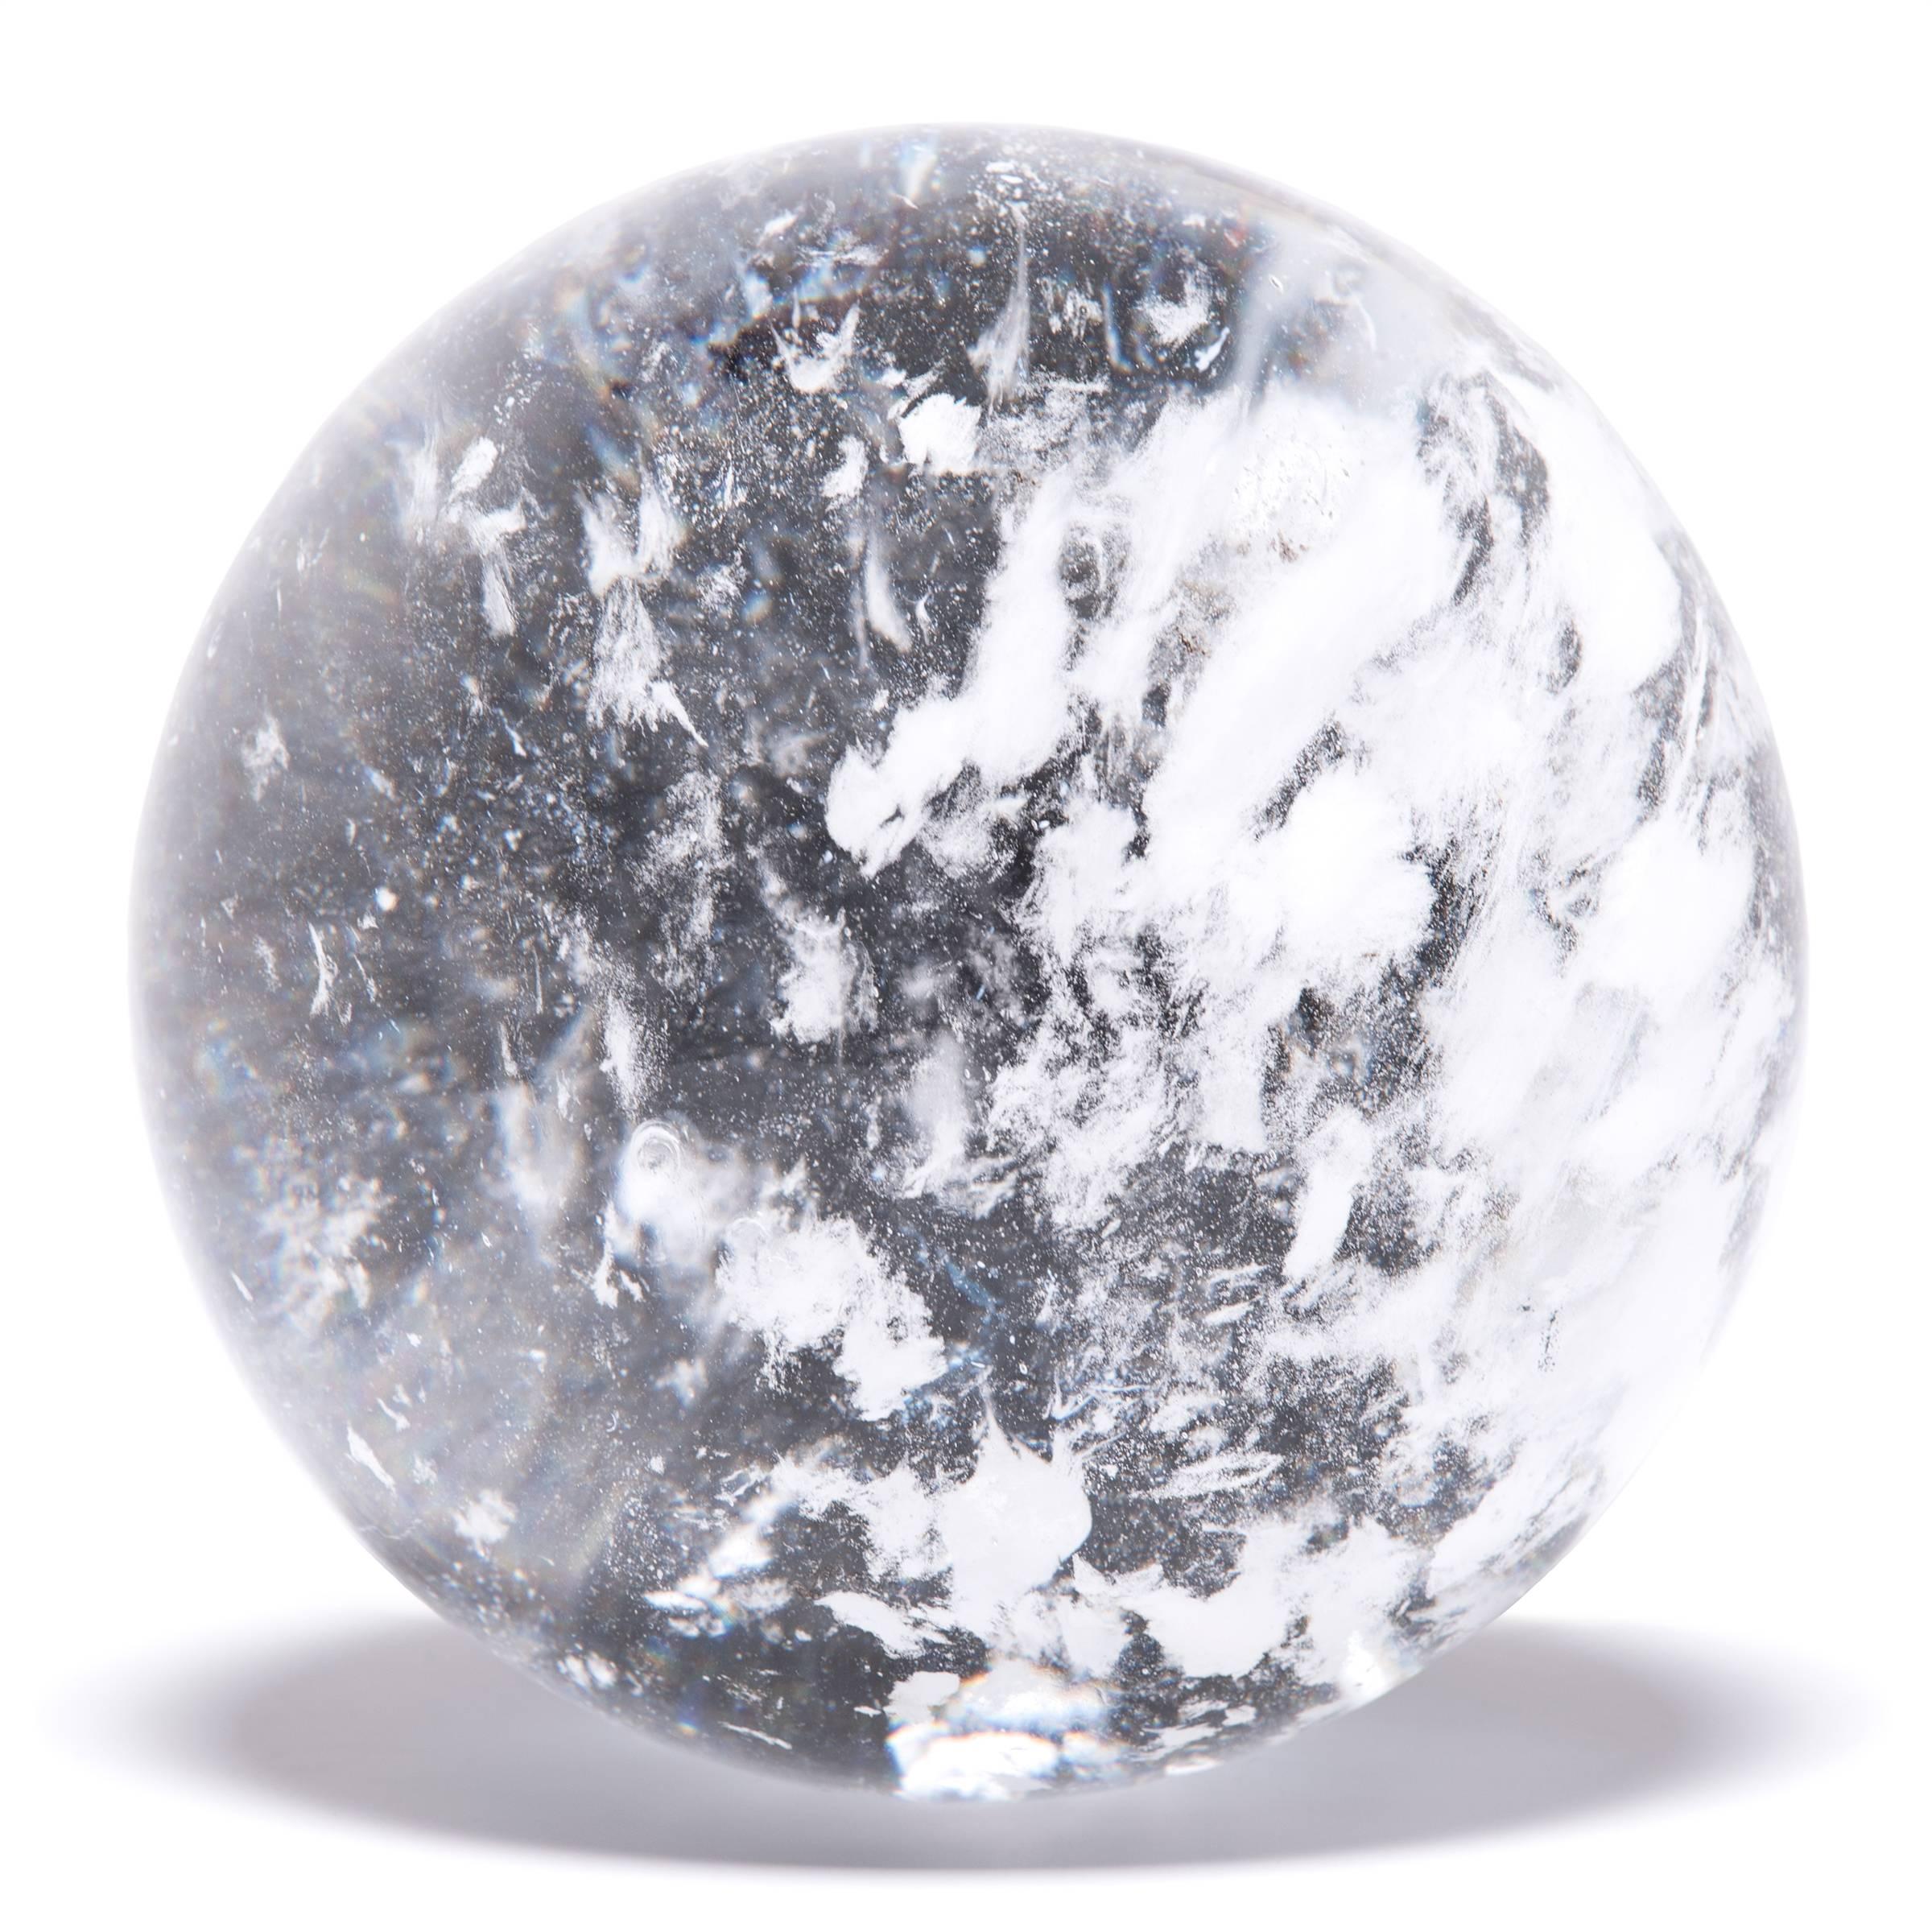 Chinese Monumental Crystal Sphere with Occlusions